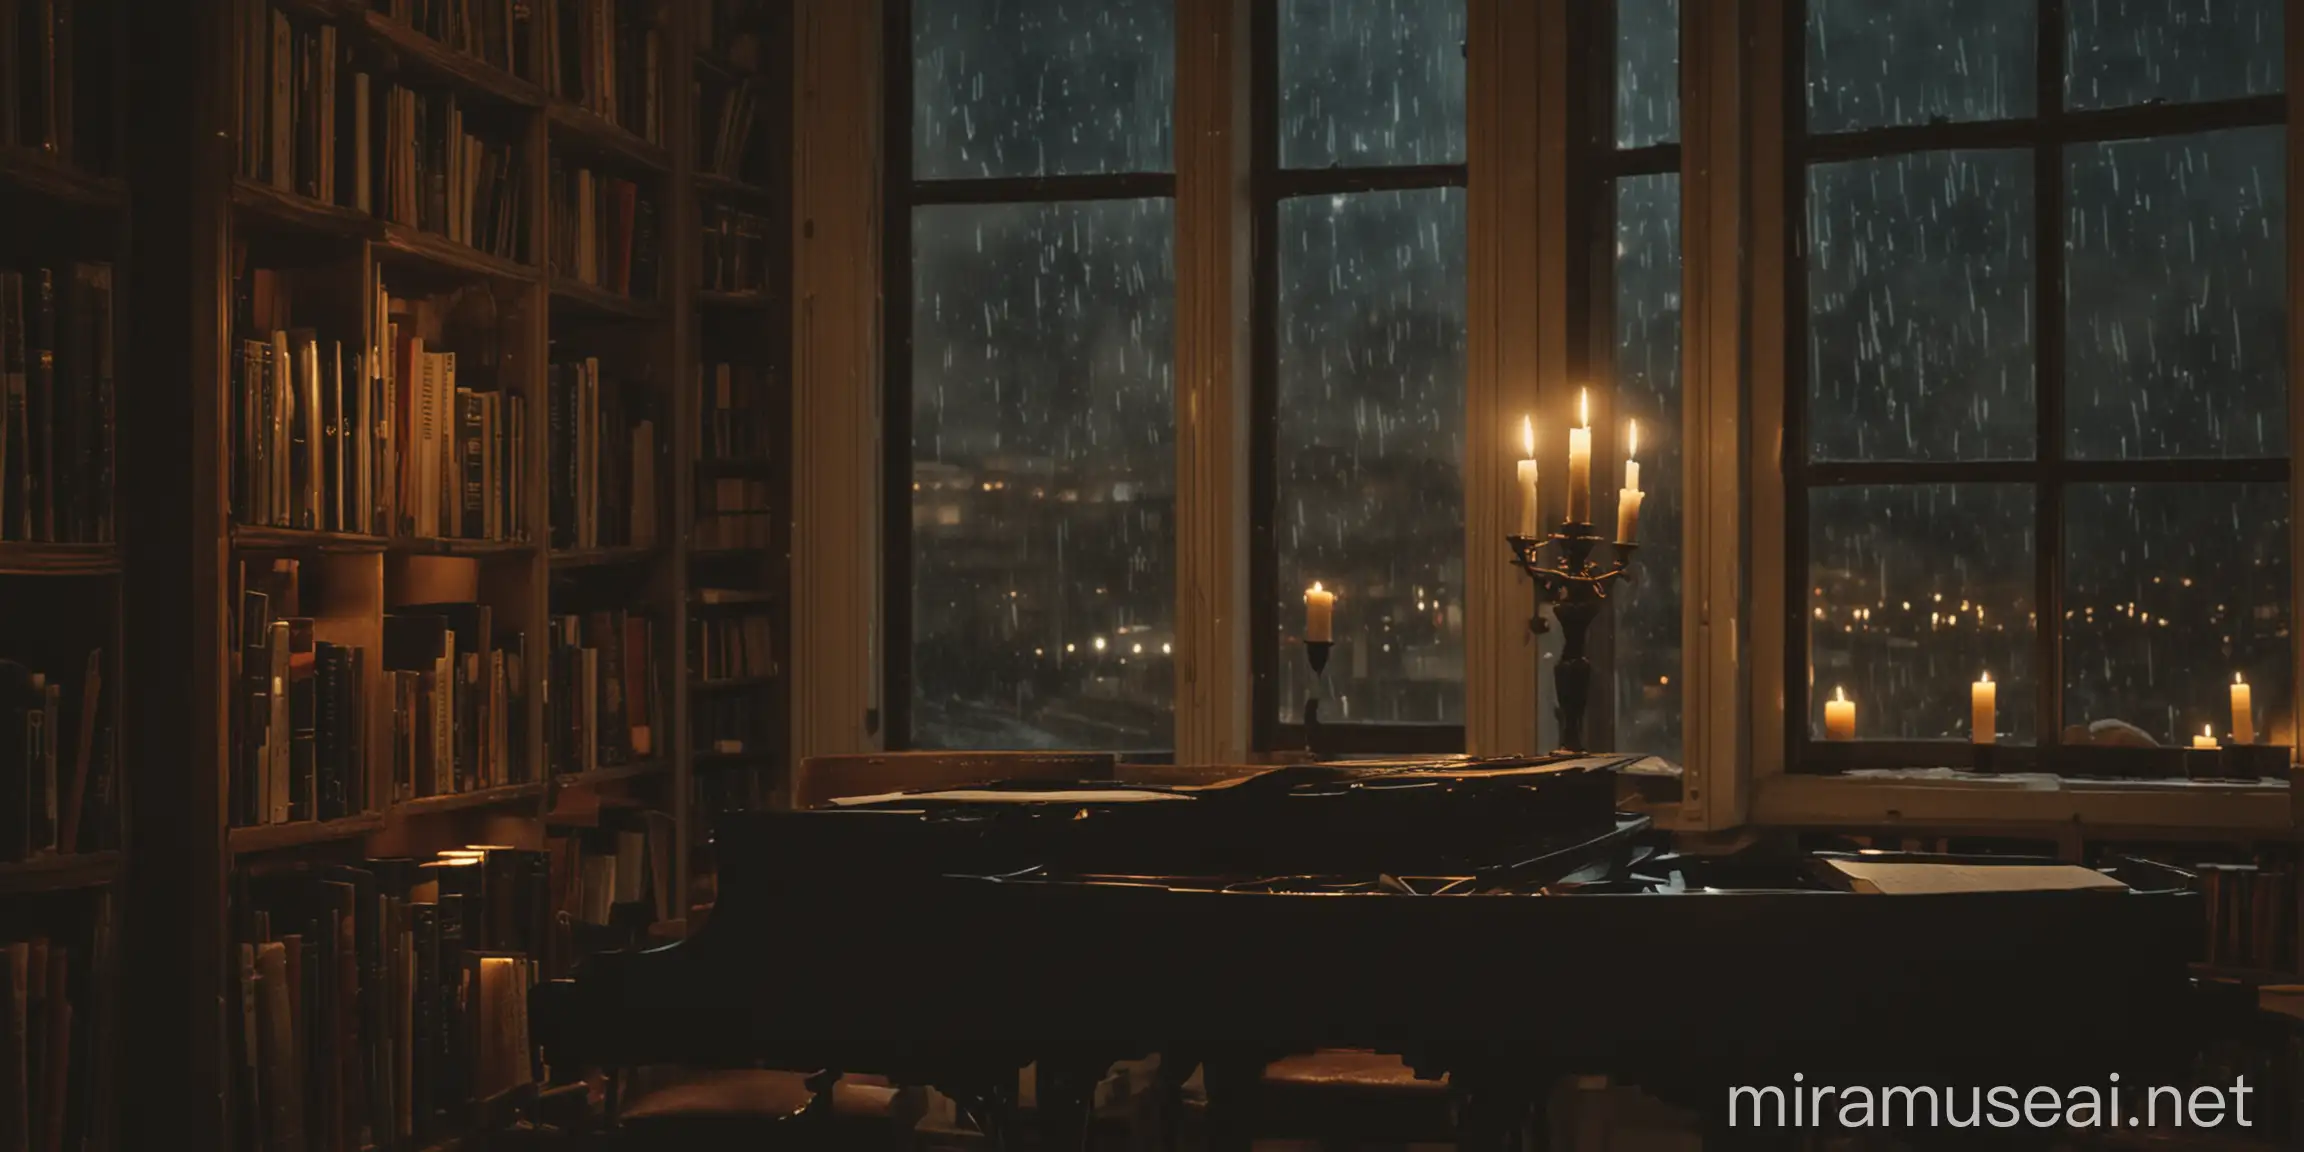 vivaldi playing the piano only with candle lights in a library. window with storm outside